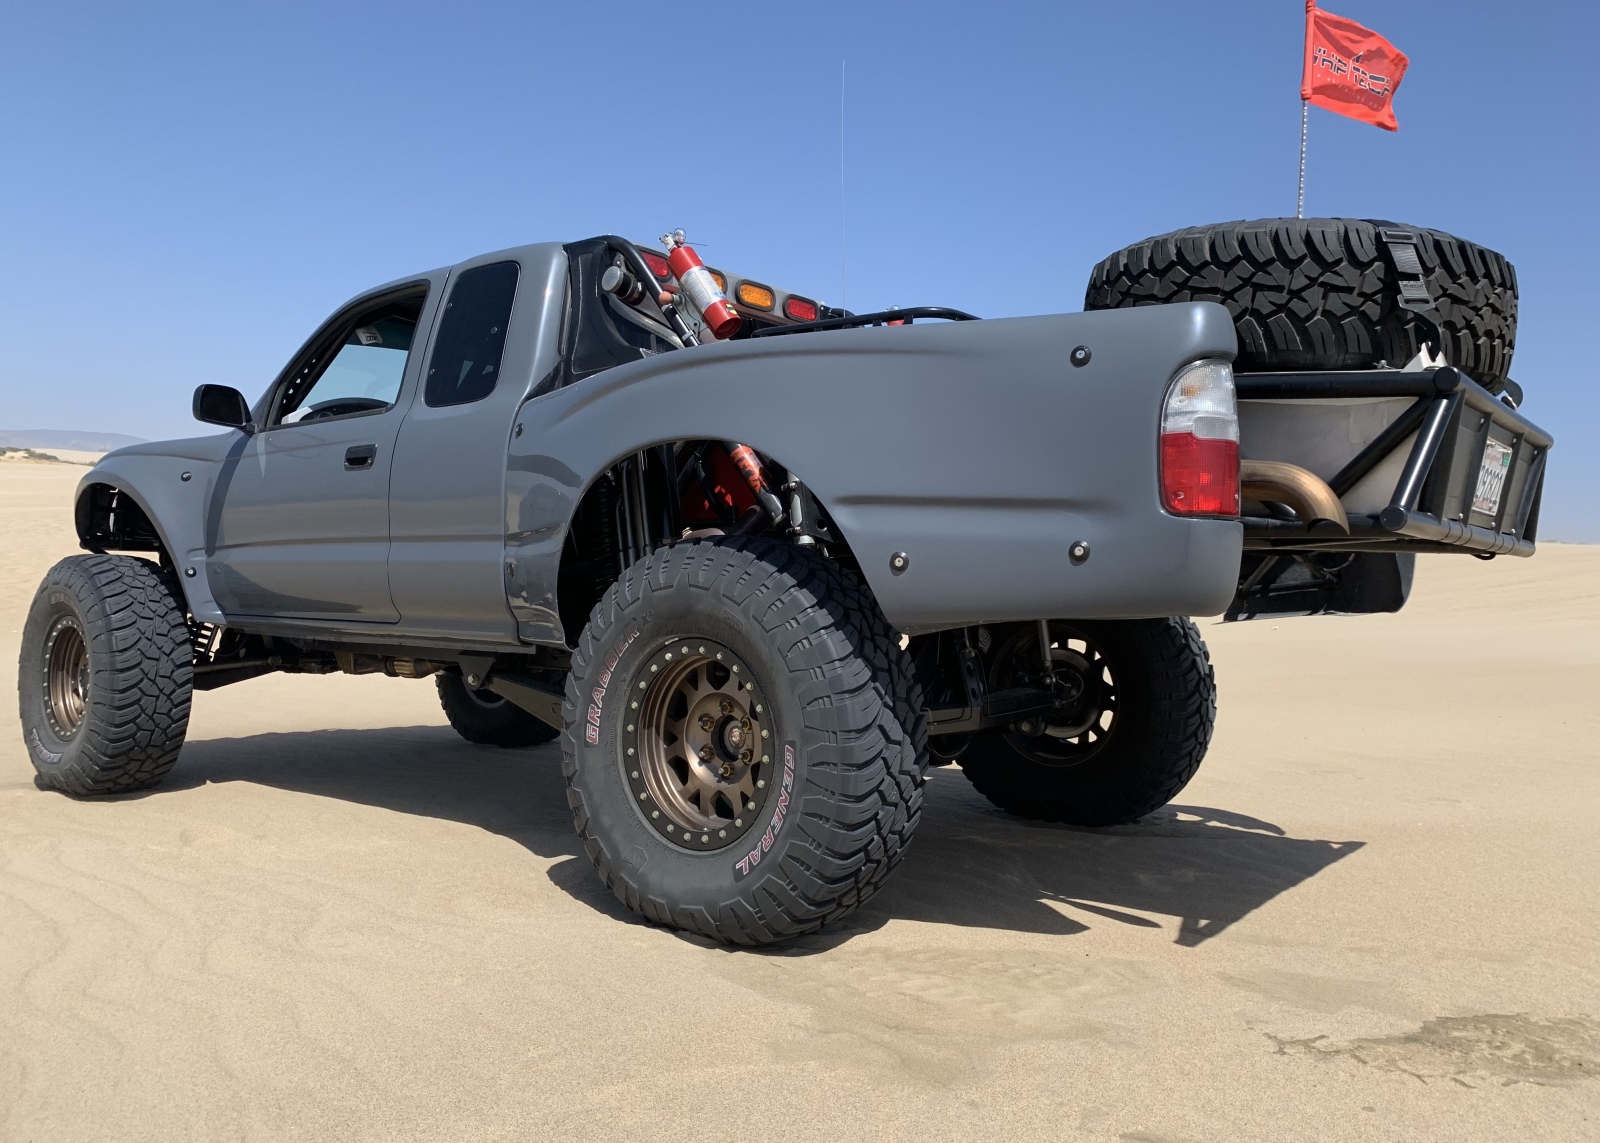 For Sale: 99 Tacoma - LS swapped - photo1